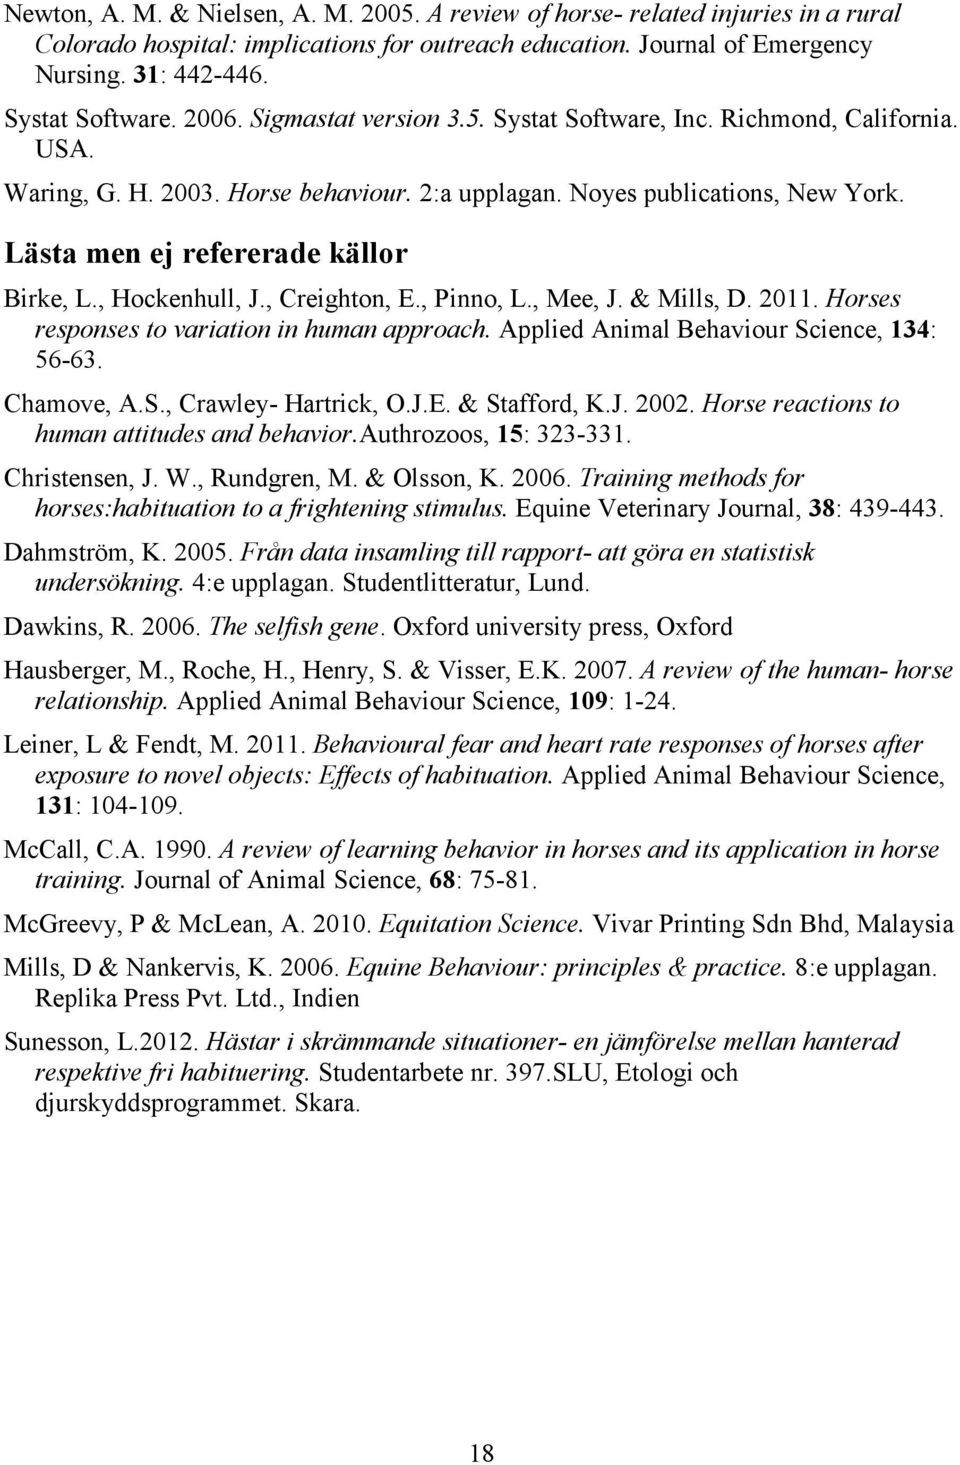 , Hockenhull, J., Creighton, E., Pinno, L., Mee, J. & Mills, D. 2011. Horses responses to variation in human approach. Applied Animal Behaviour Science, 134: 56-63. Chamove, A.S., Crawley- Hartrick, O.